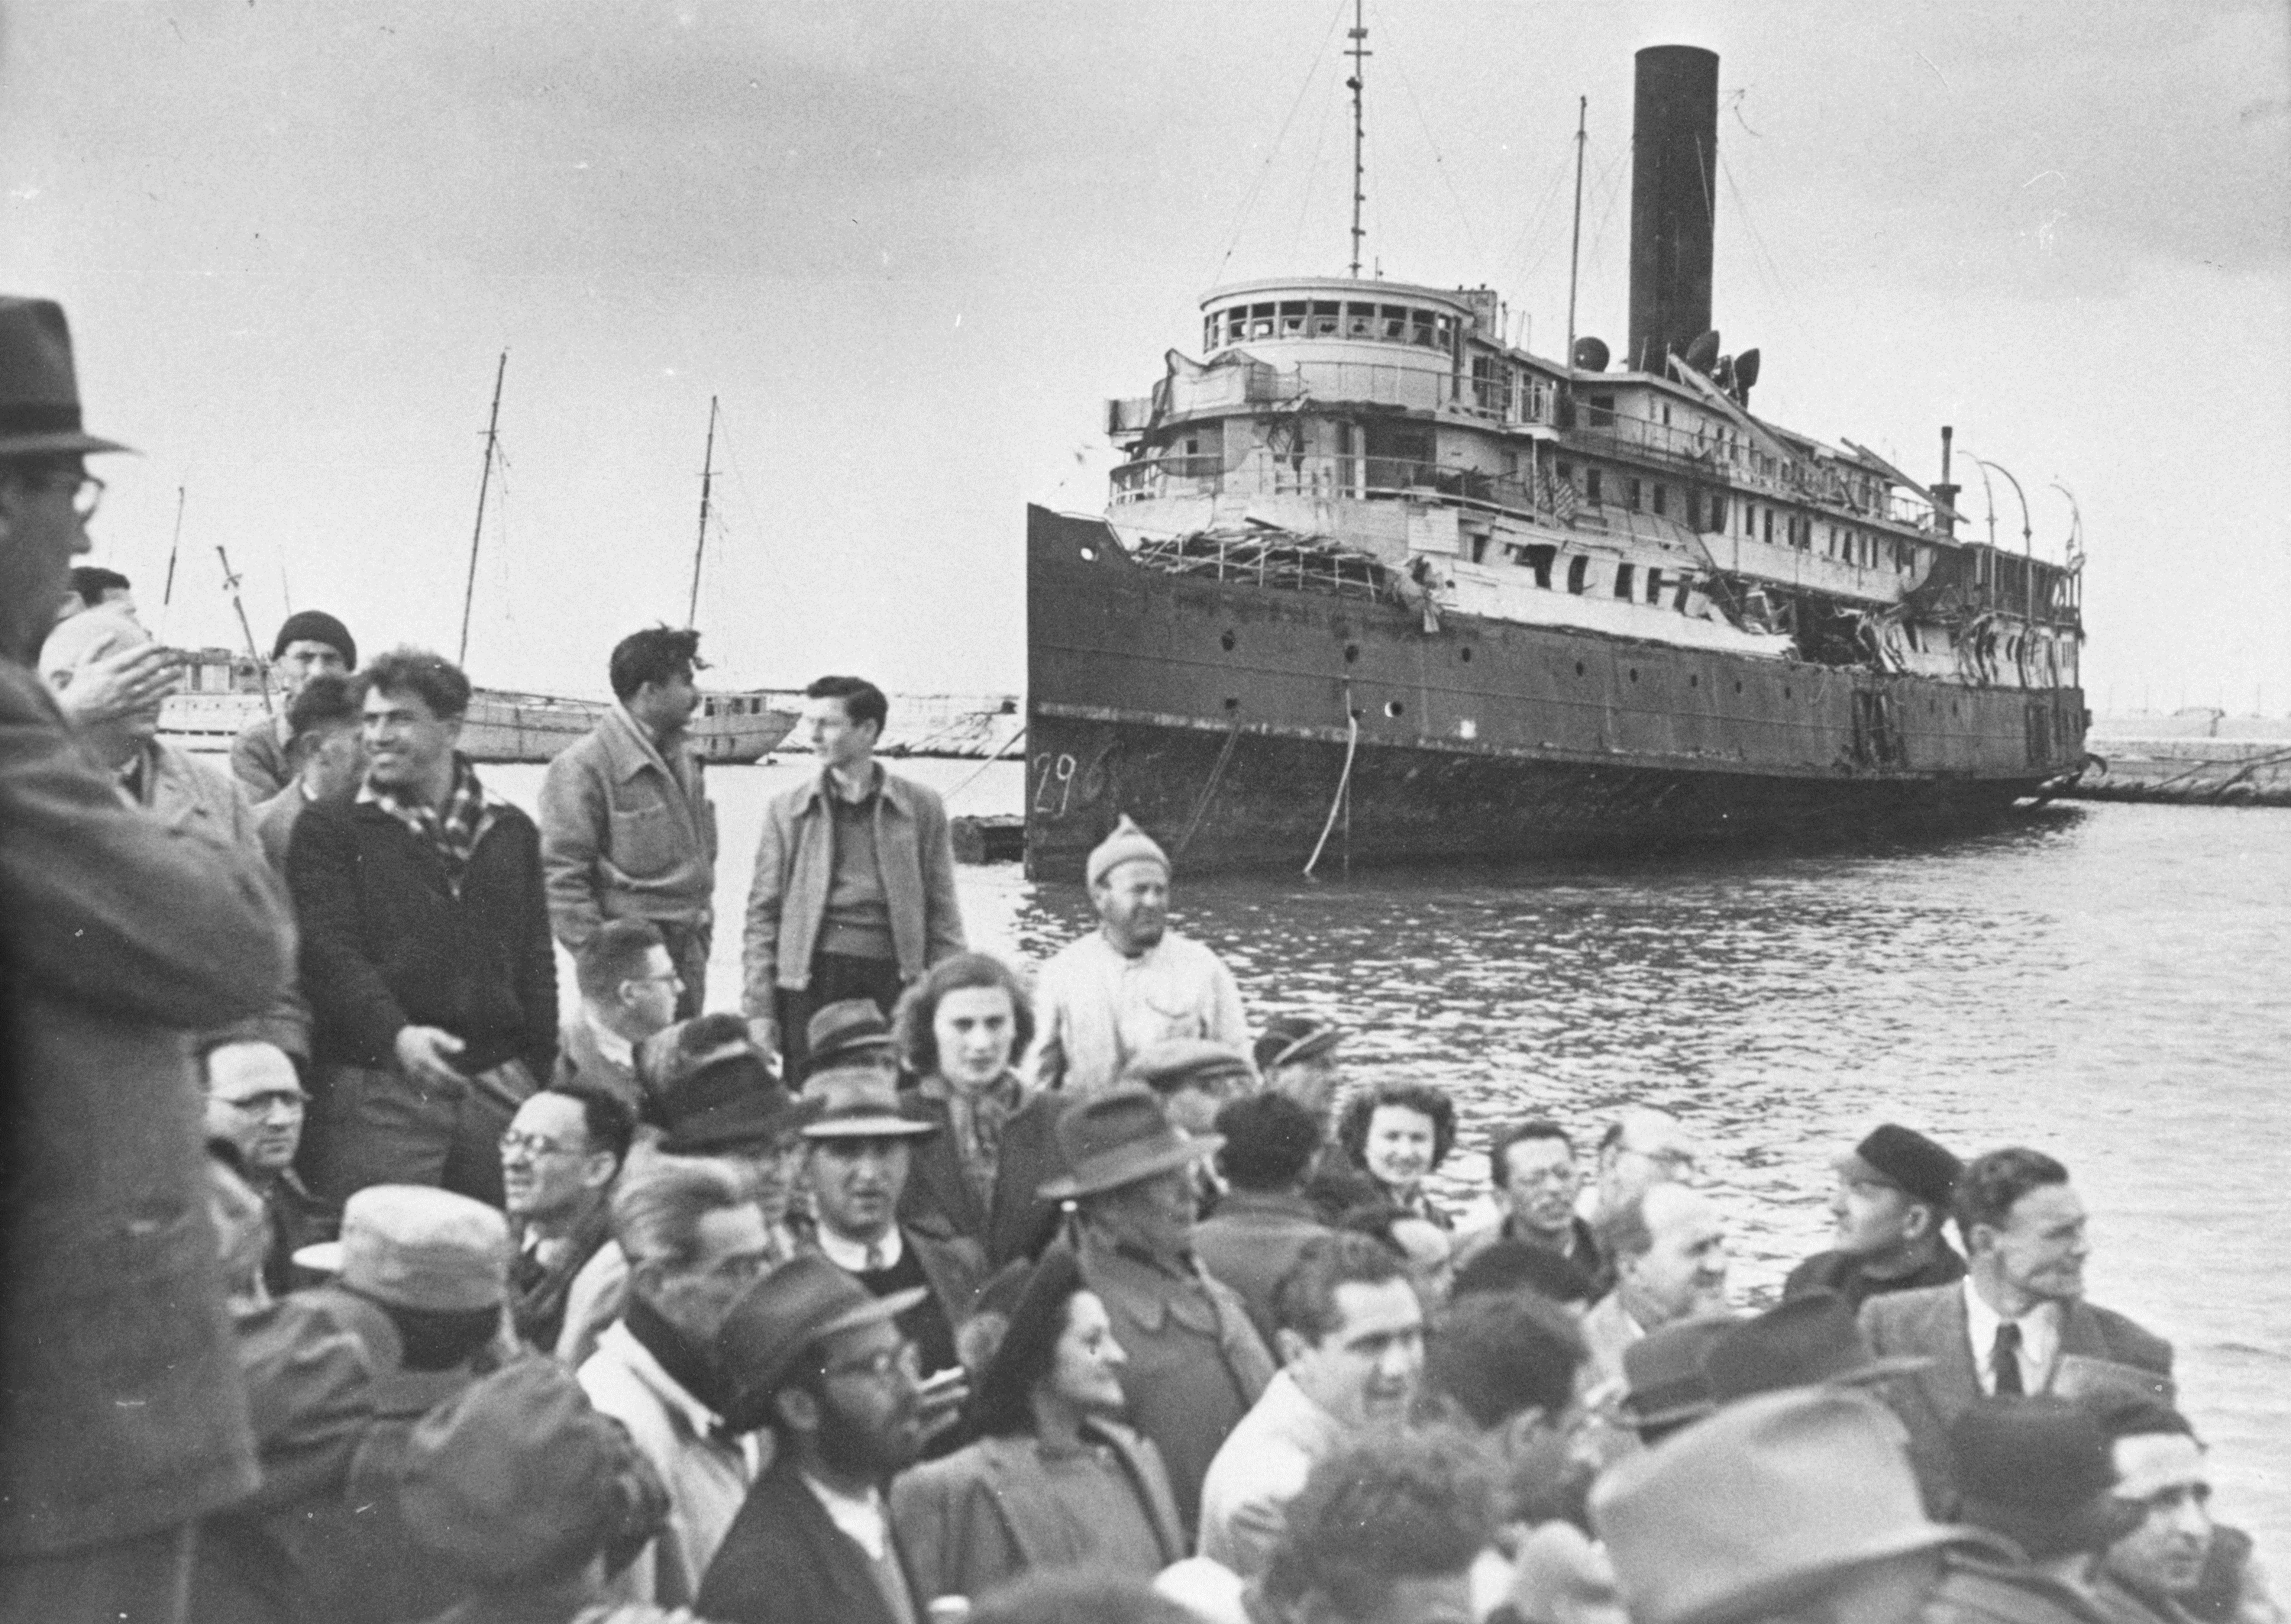 Forgotten Heroes: The Jewish Resistance and Exodus 1947